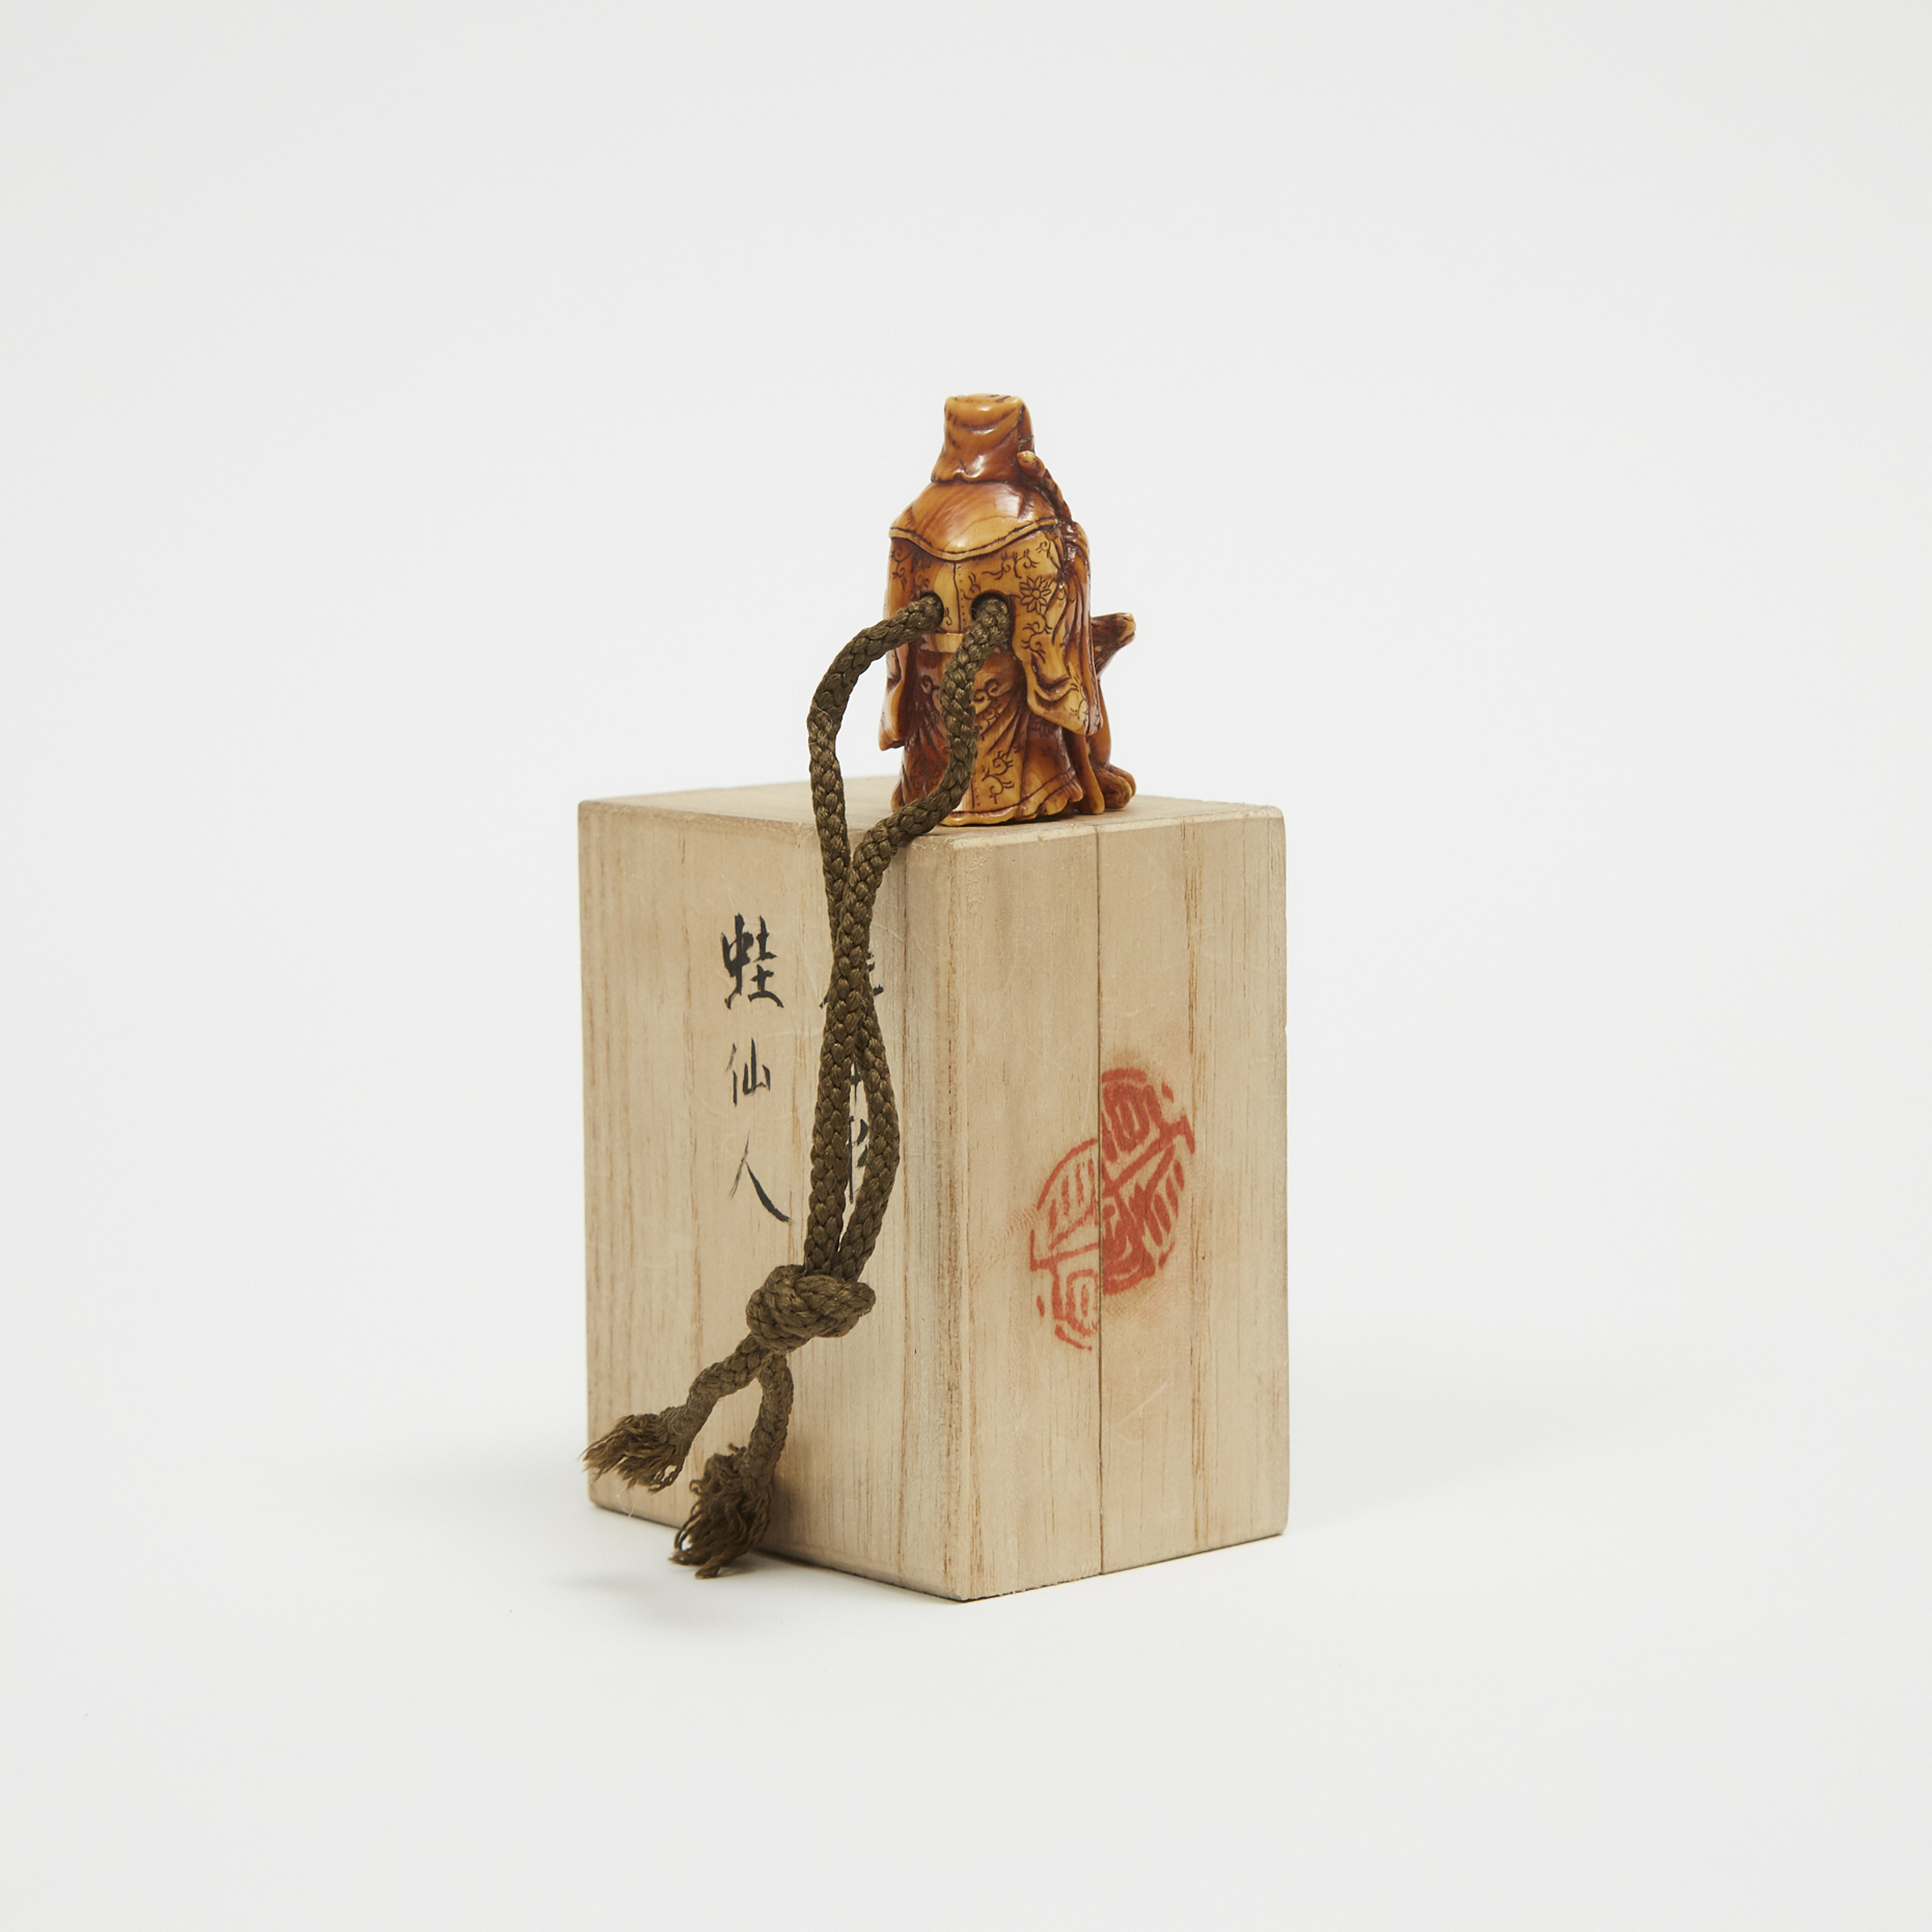 An Ivory Netsuke of an Old Man and Deer, with Signed Box